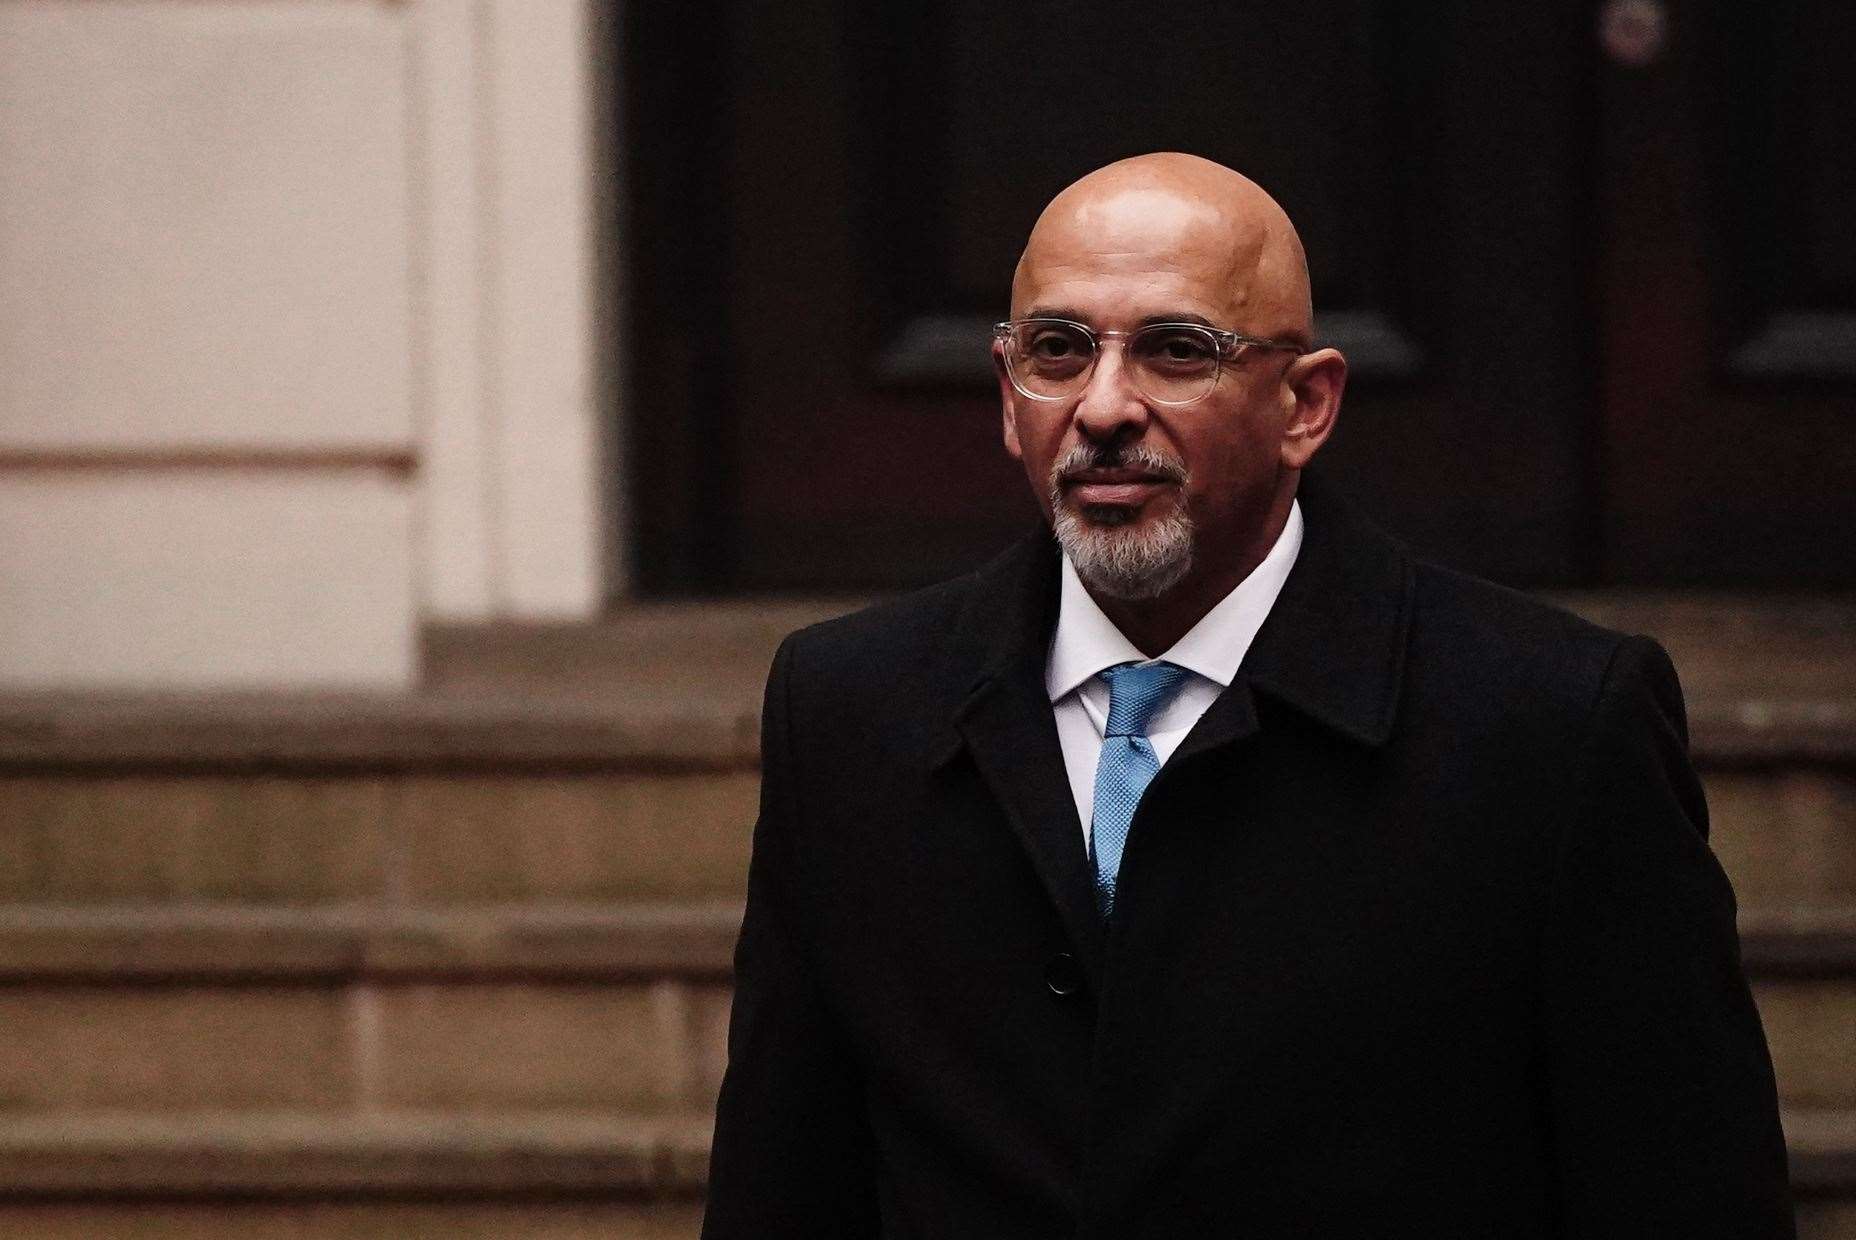 Nadhim Zahawi was sacked as Conservative Party chairman over his tax affairs controversy (Victoria Jones/PA)